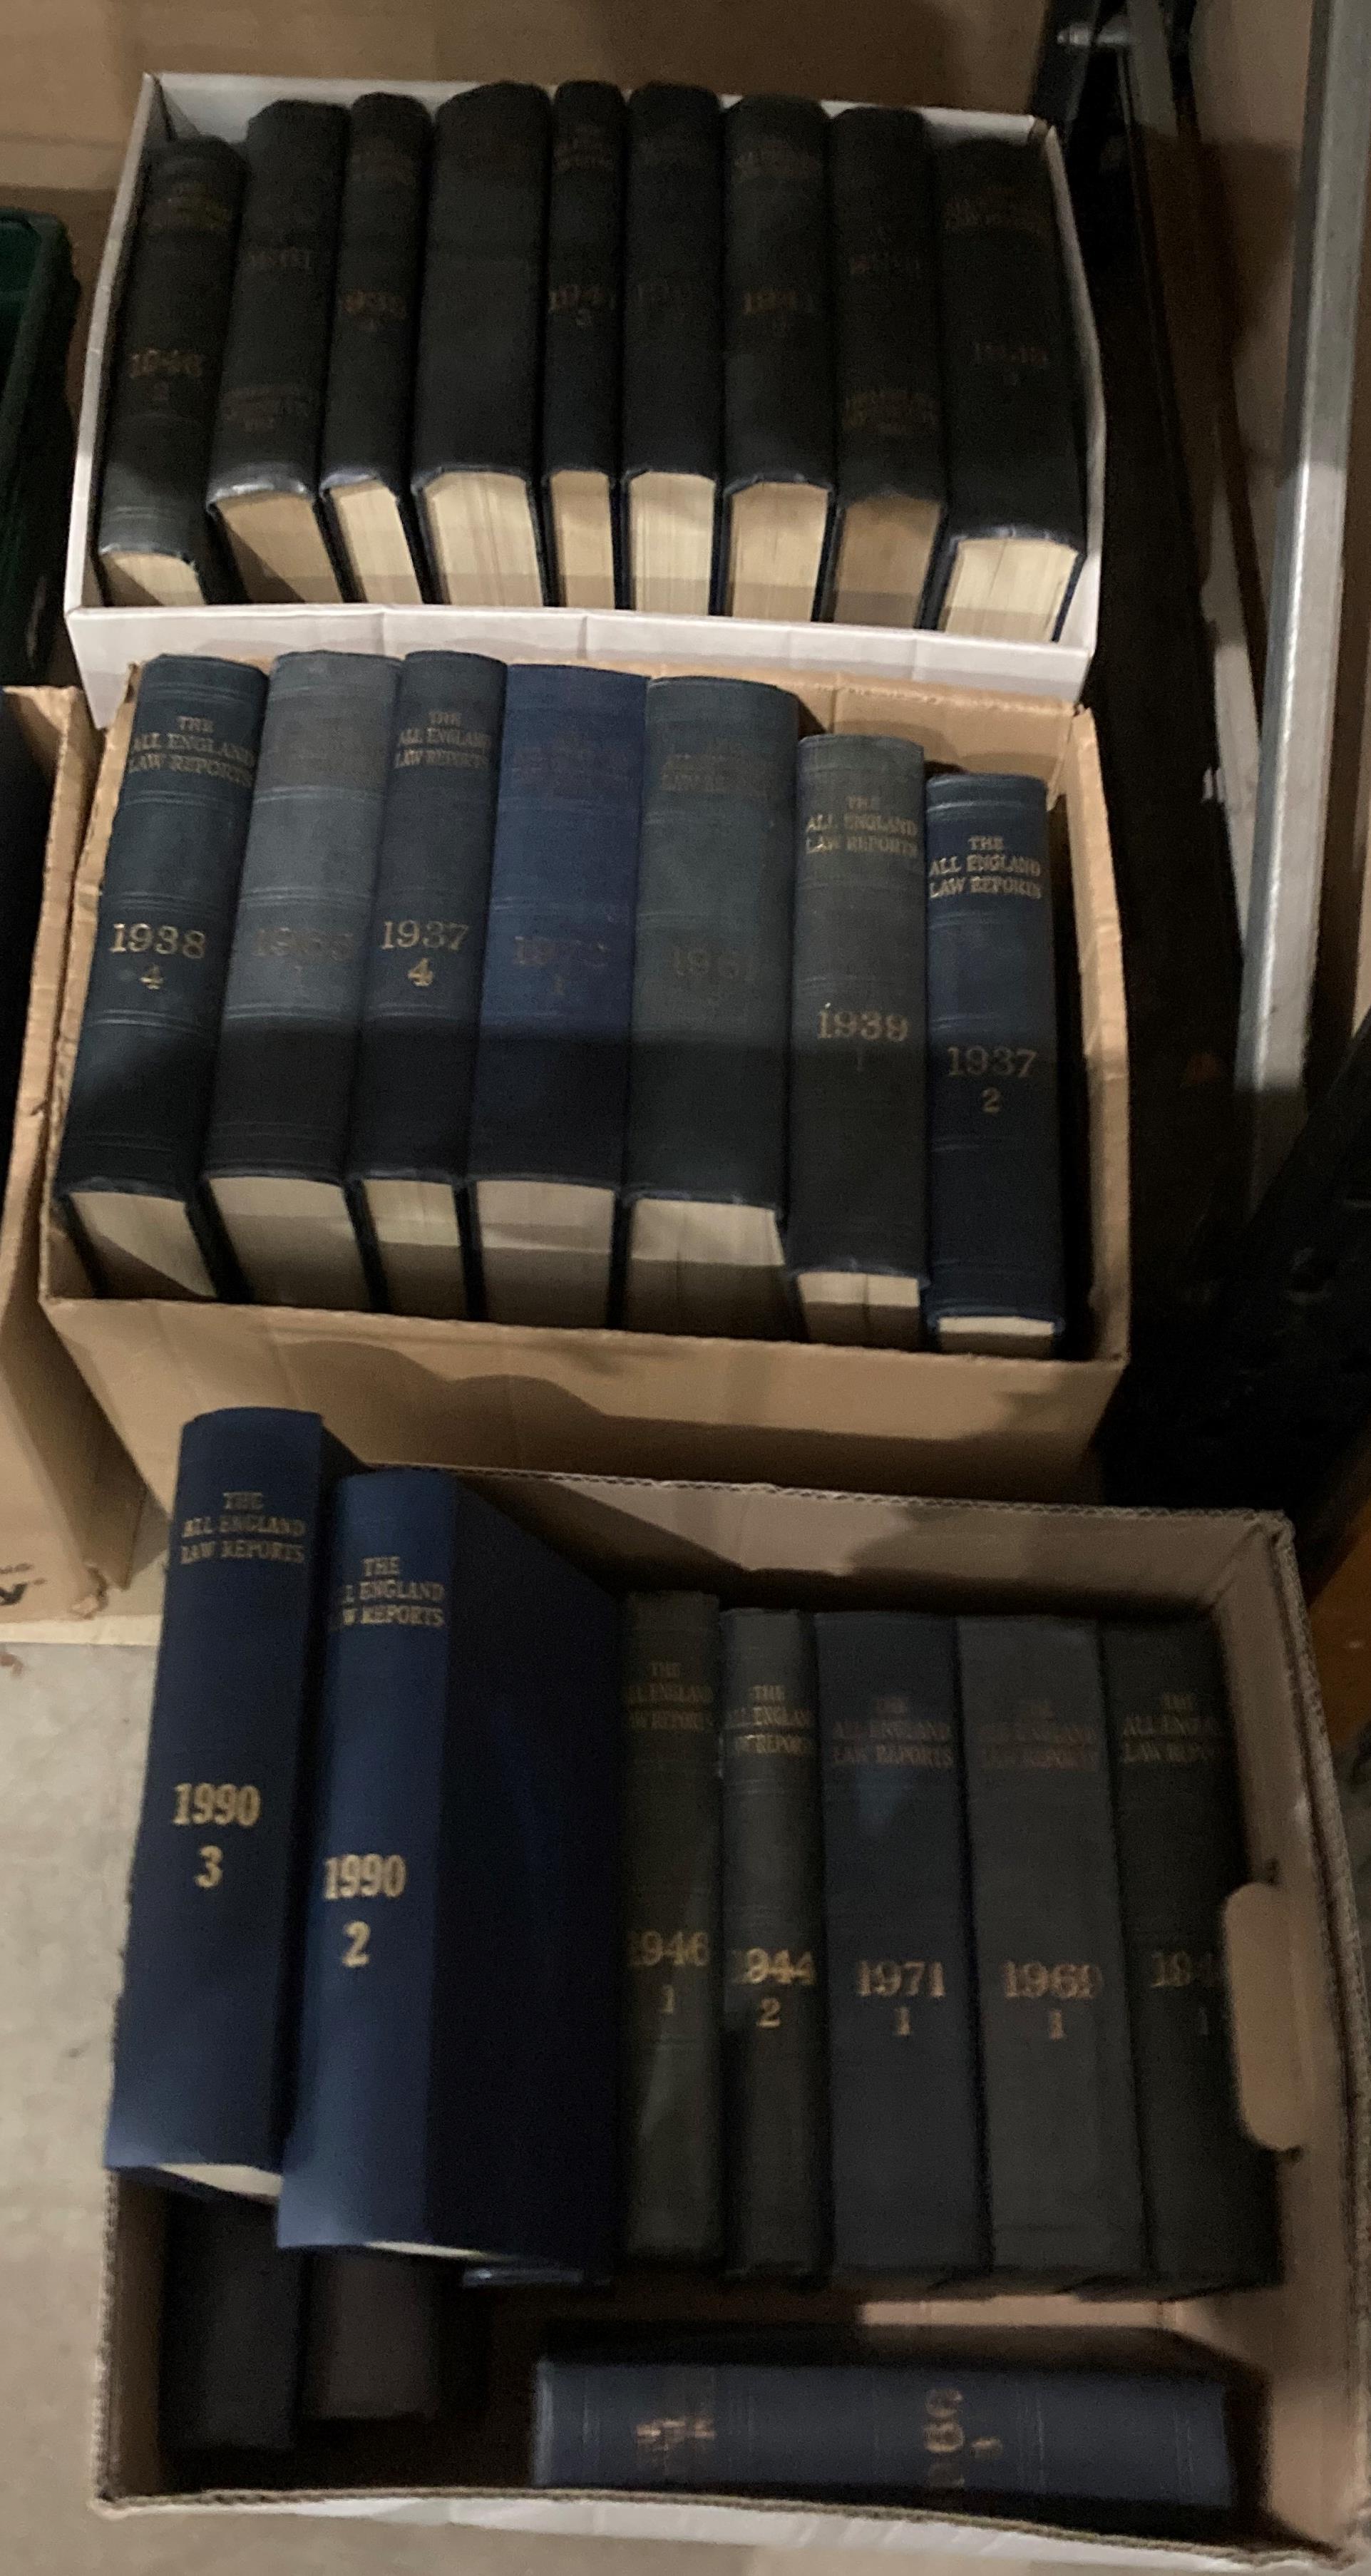 Contents to thirteen crates and boxes over 170 volumes of the 'All England Law Reports' covering - Image 6 of 6